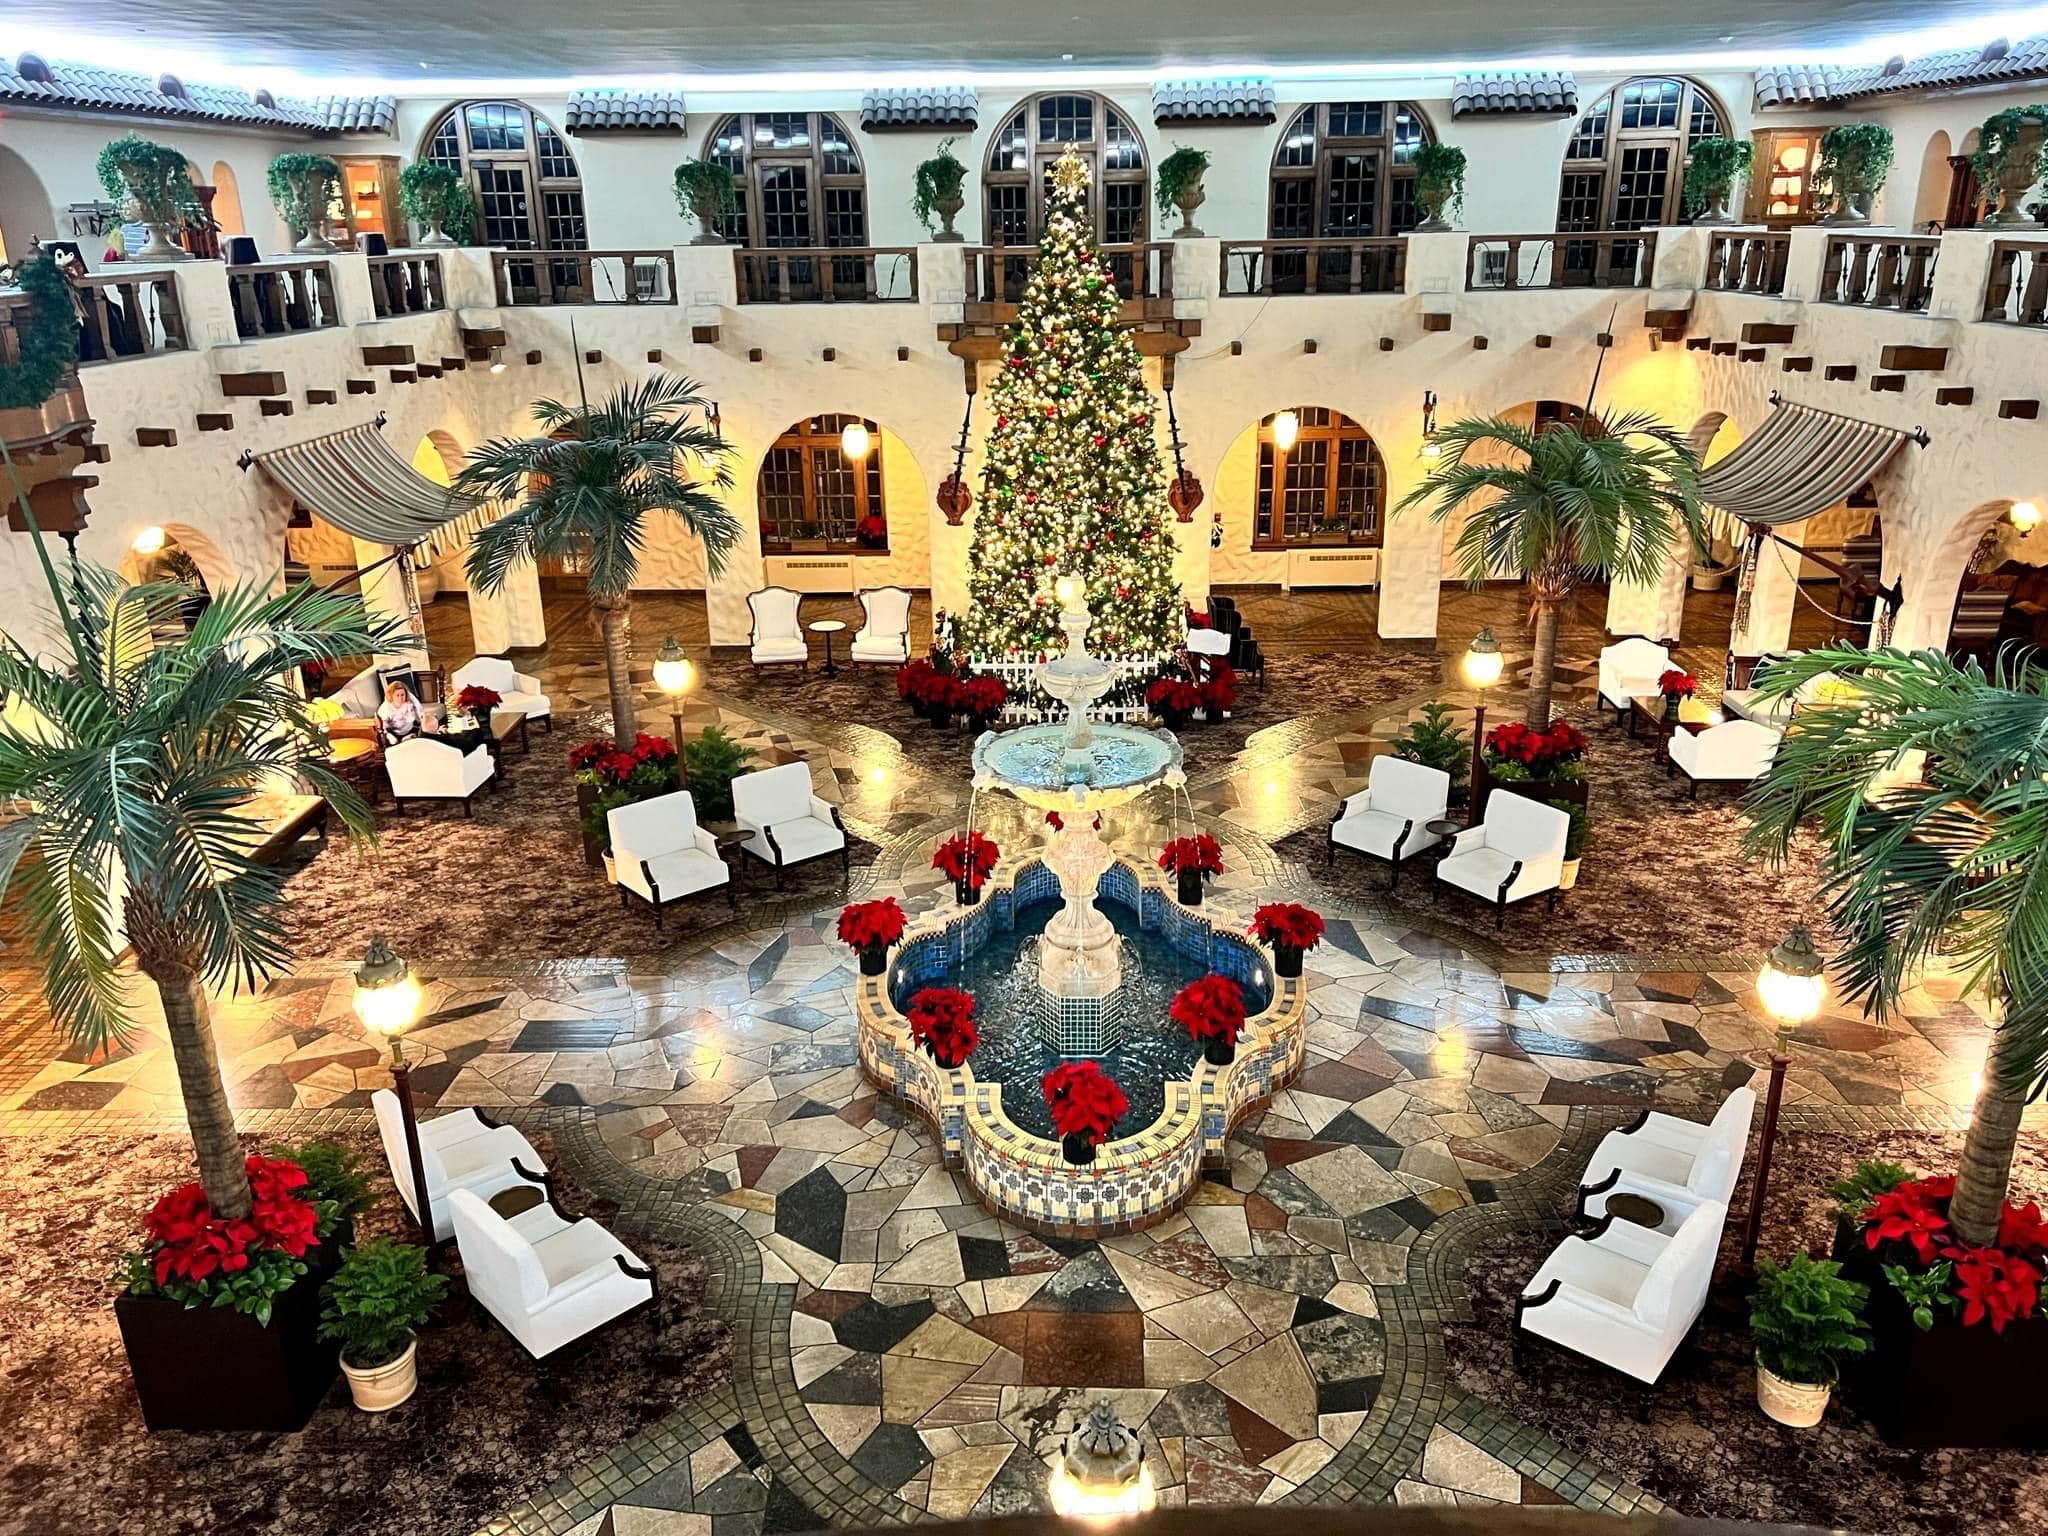 The Hotel Hershey at Christmas